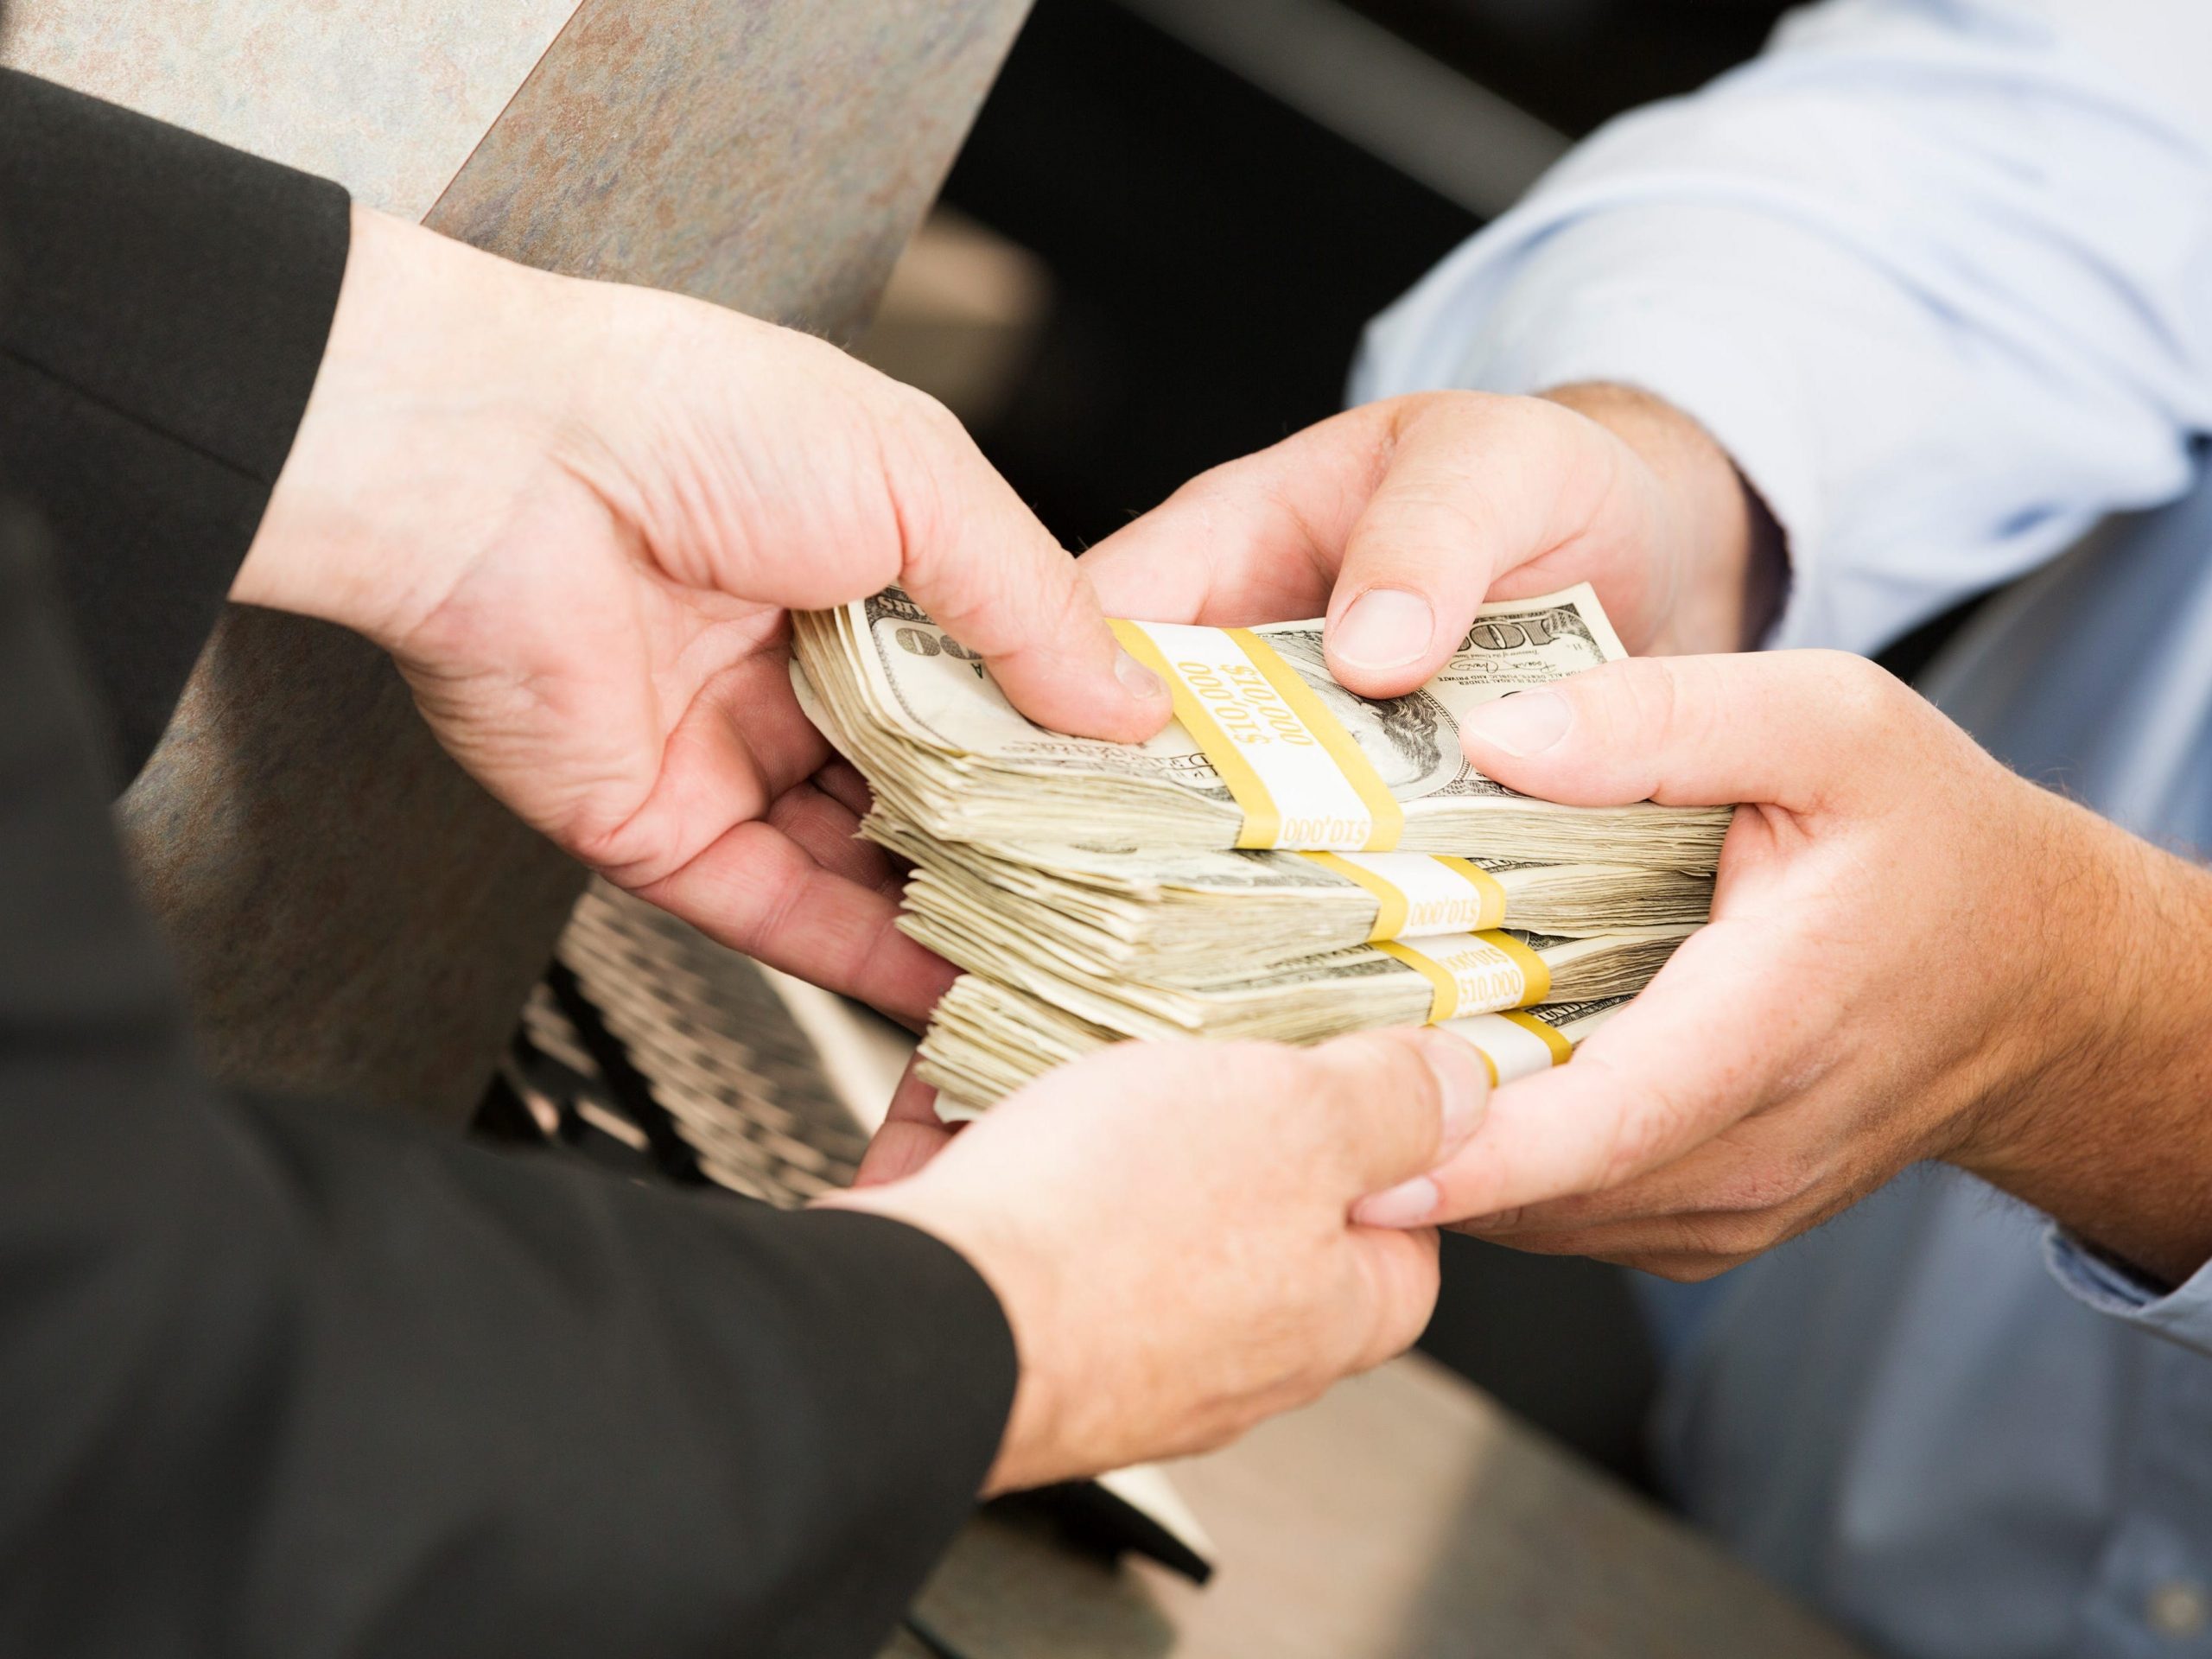 Stock image of a large sum of money exchanging hands